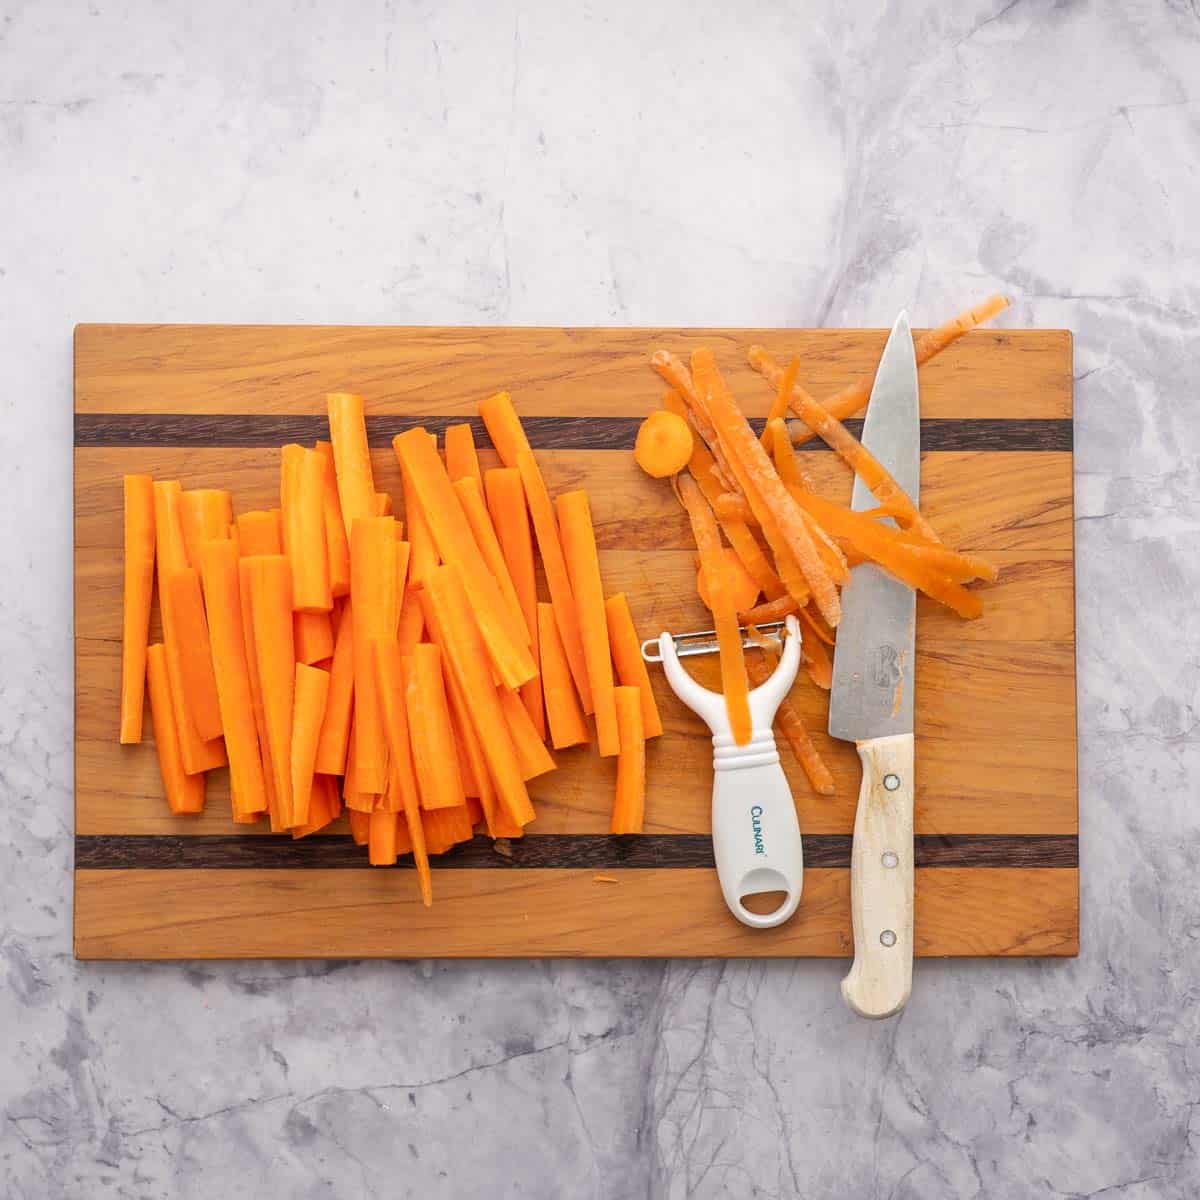 Carrot sticks on a wooden chopping board with a knife and vegetable peeler.